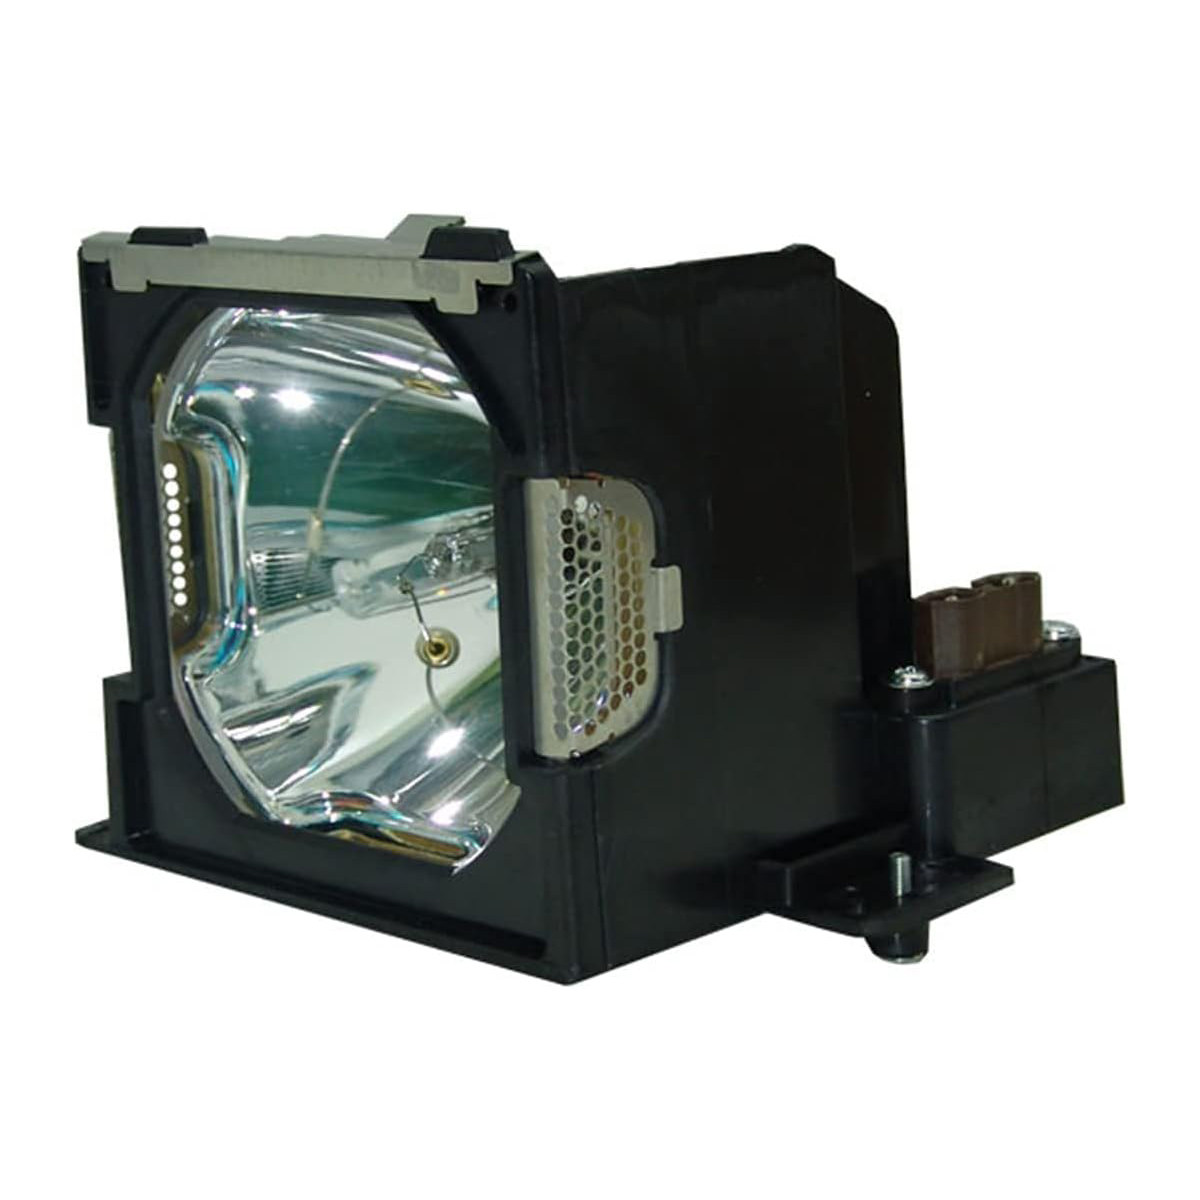 Replacement Projector lamp 03-000882-01P For CHRISTIE VIVID LX40/VIVID LX50